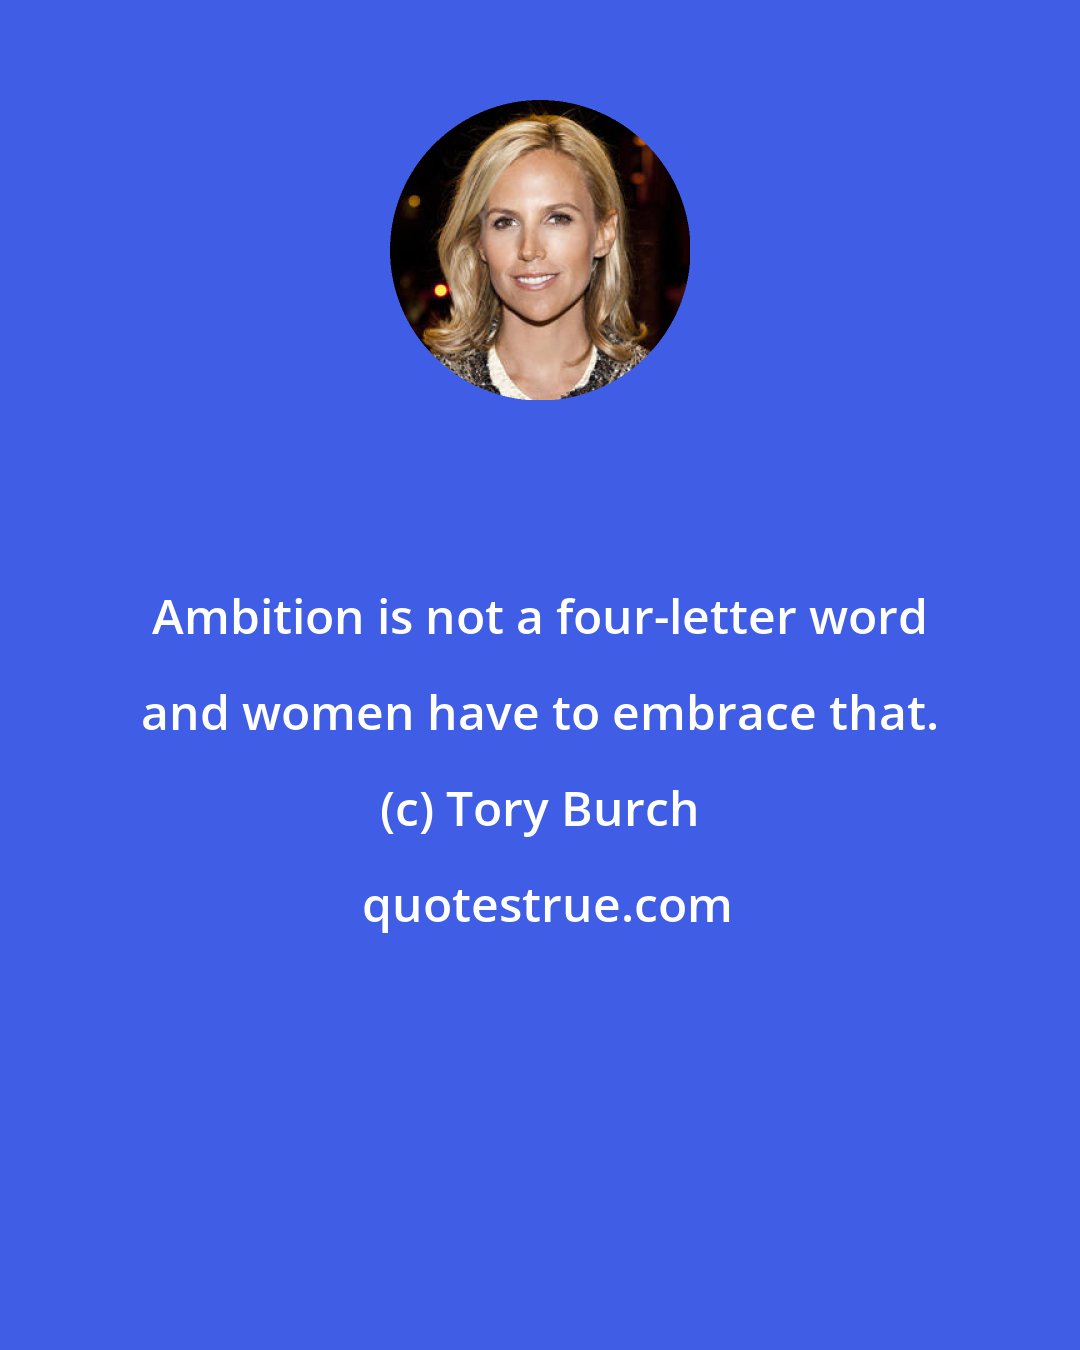 Tory Burch: Ambition is not a four-letter word and women have to embrace that.